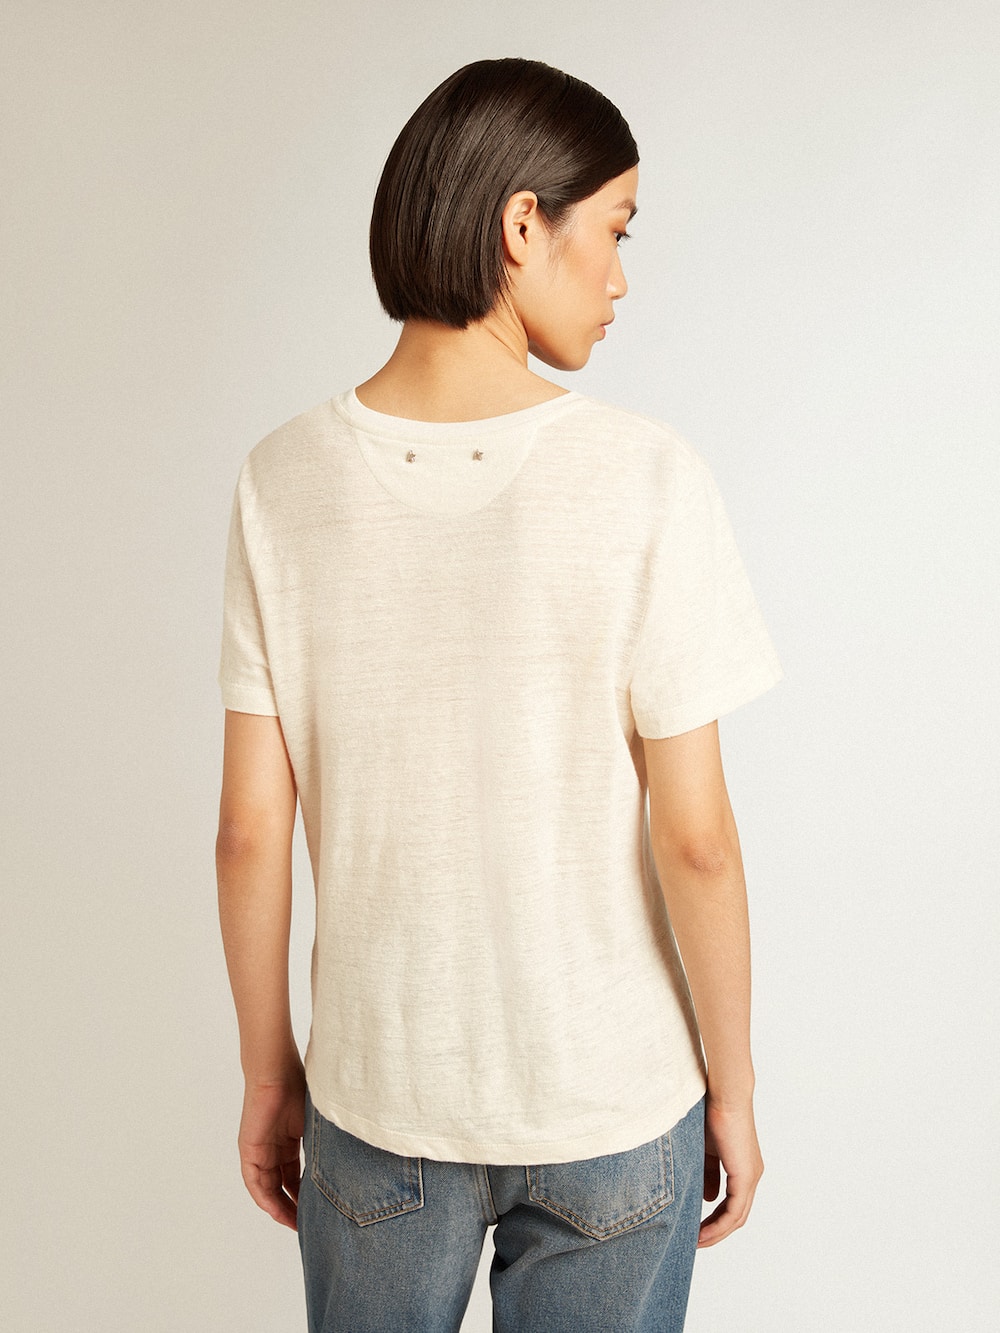 Golden Goose - Women’s cotton T-shirt in aged white with embroidered pocket in 